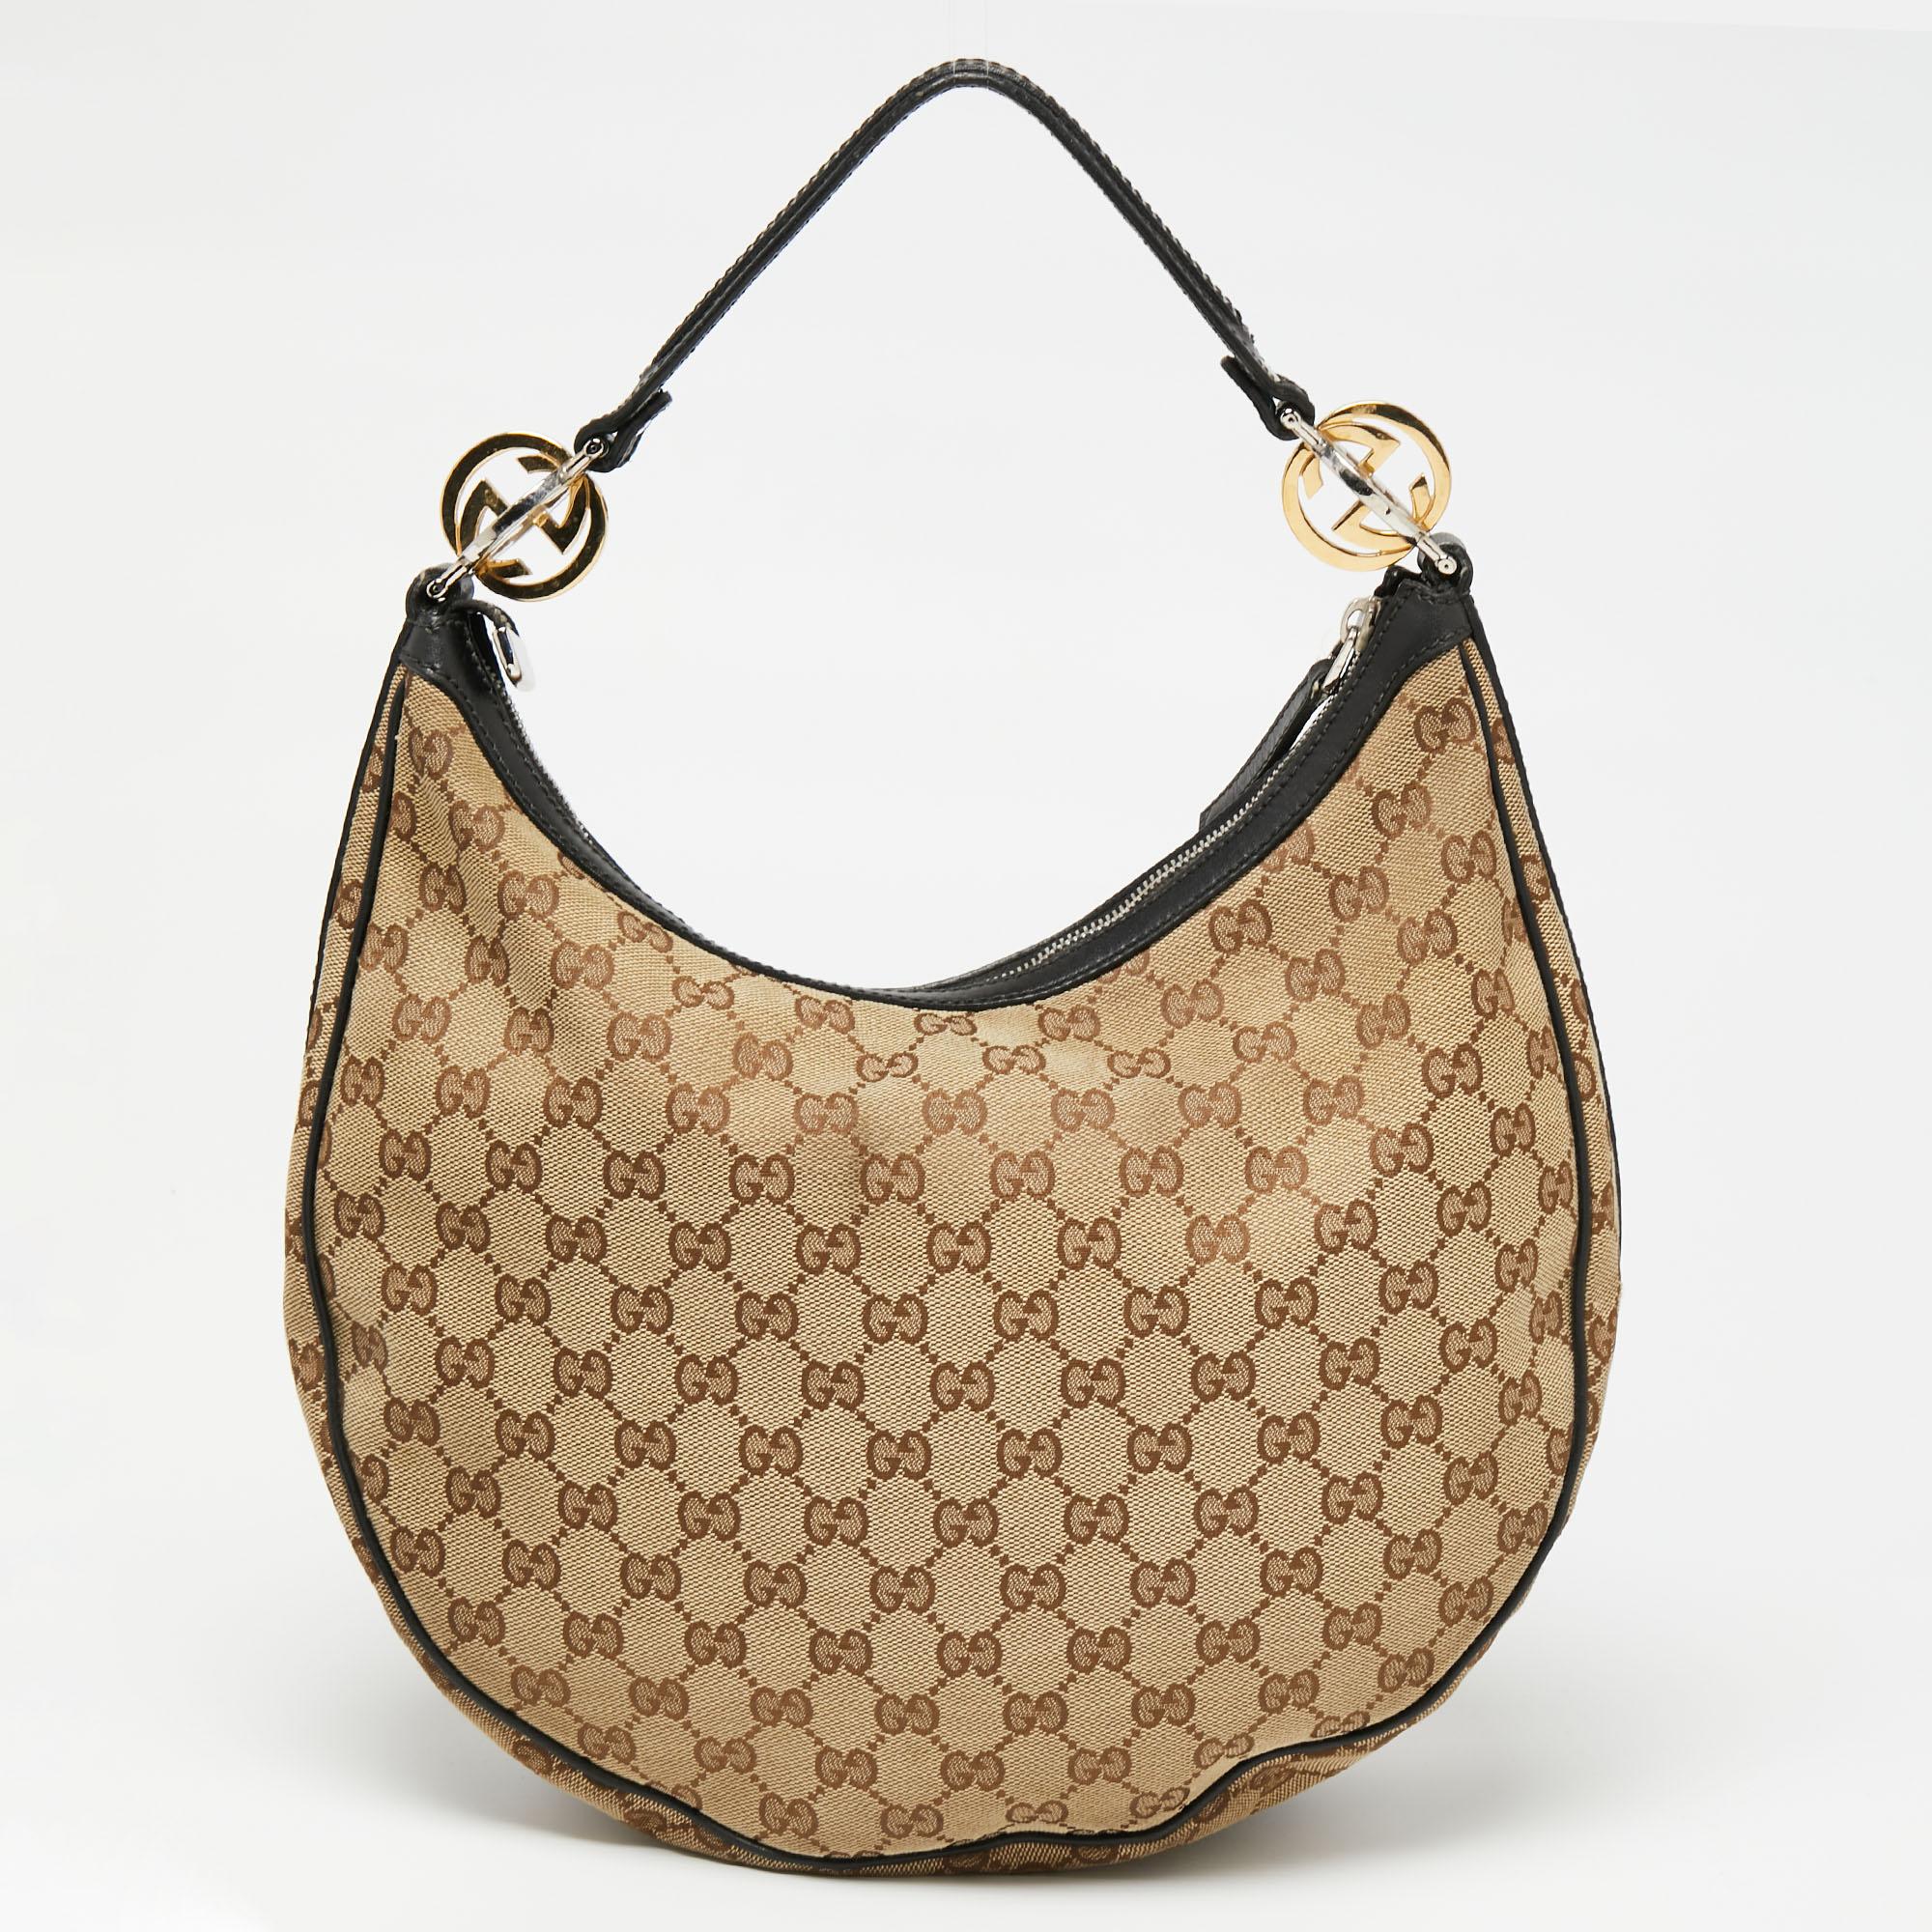 Chic and durable is this pretty GG Twins hobo from Gucci. Crafted from canvas and leather, this gorgeous bag has a top zip closure that opens up to a spacious fabric interior. Complete with a single handle that has the signature GG accents on its